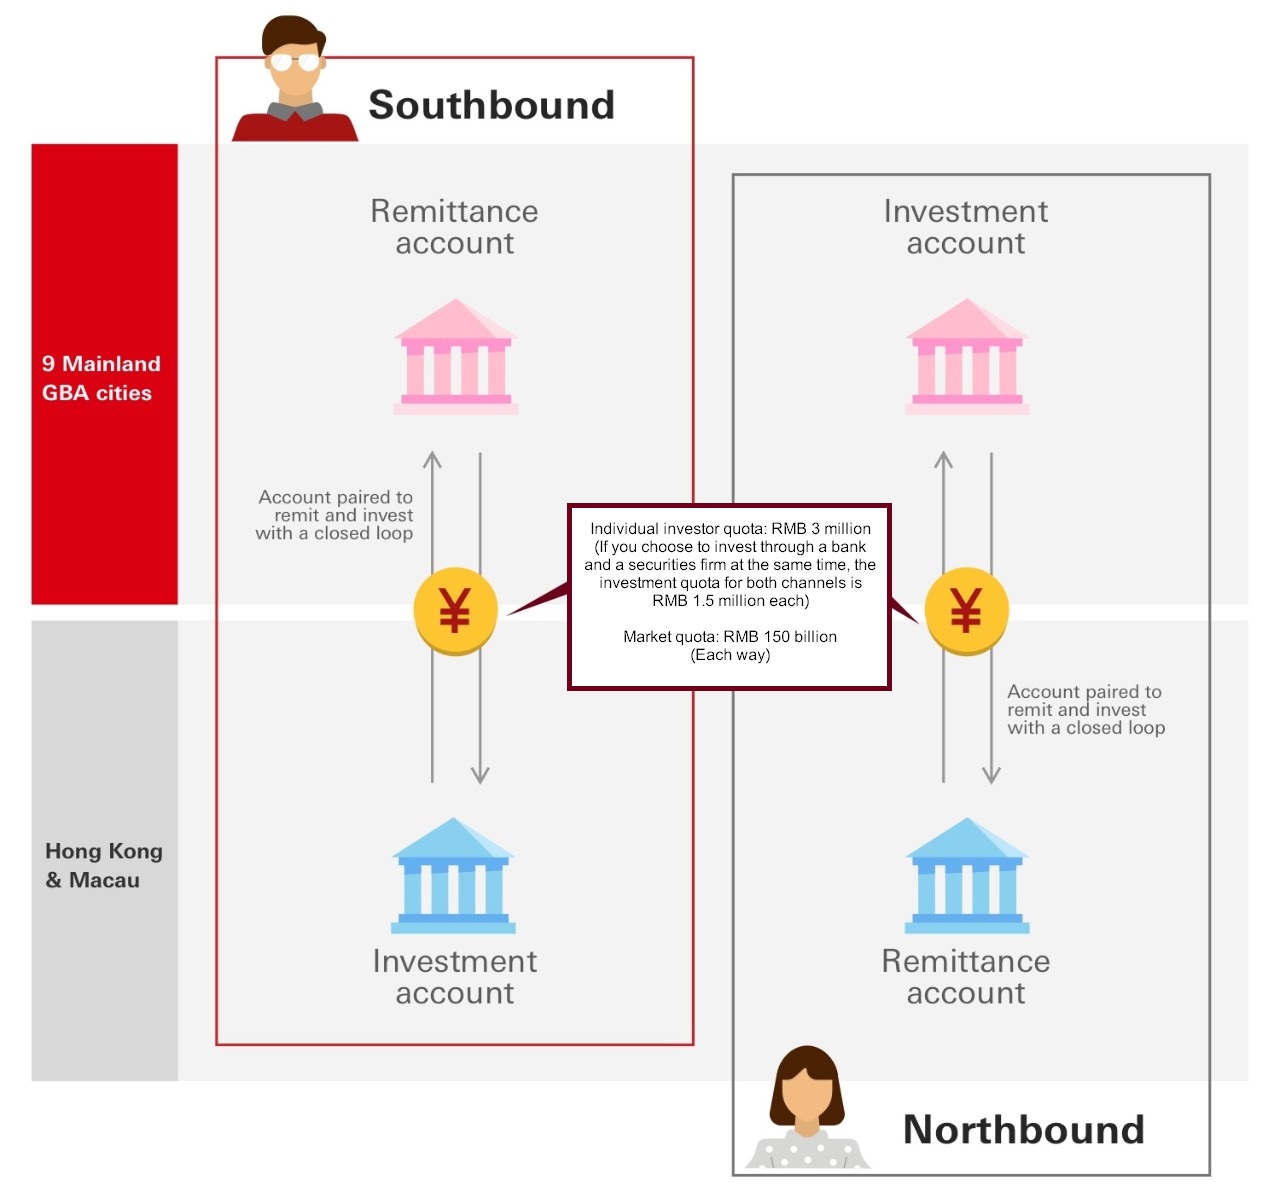 Eligible customers can conduct cross-border closed-looped remittance and investment through paired accounts. Total market quota is set at RMB 150 billion for each of the Southbound and Northbound services, while individual investor quota is set at RMB 3 million. If you choose to invest through a securities firm in addition to HSBC GBA Wealth Management Connect, the investment quota allocated between the channels is RMB 1.5 million each.